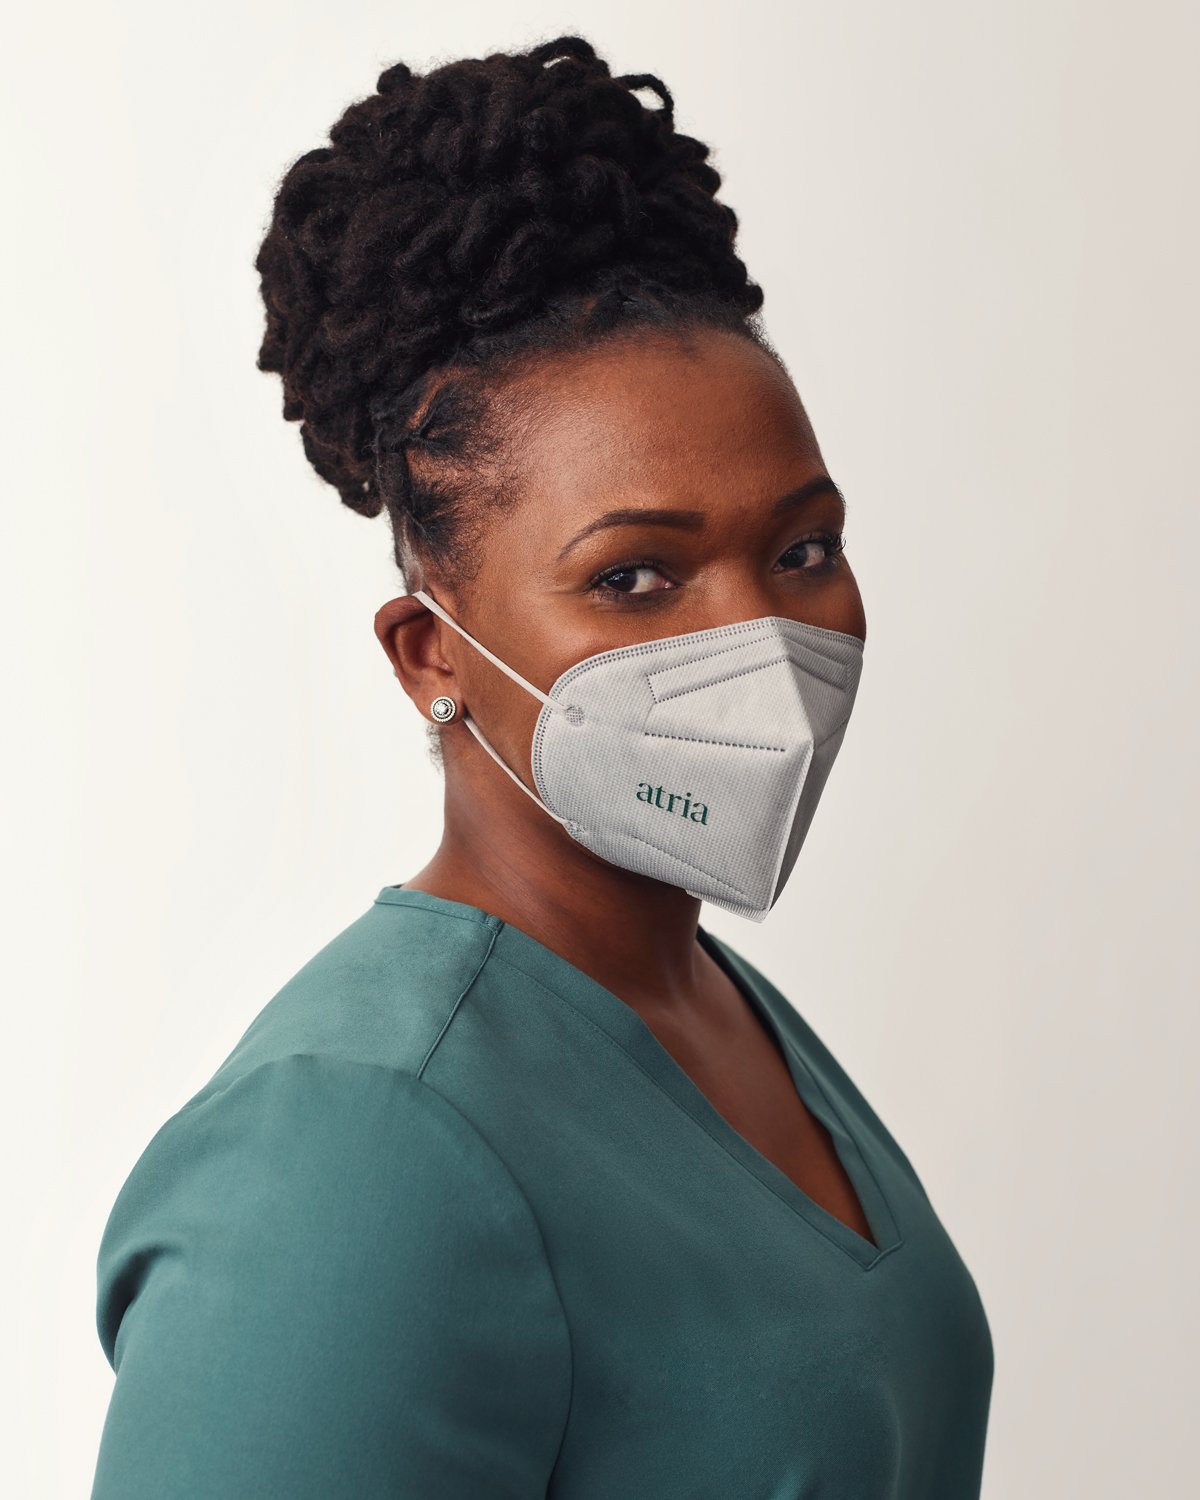 HeadshotHeadshot of an Atria healthcare worker in teal scrubs and a branded mask with a white background of a healthcare worker in teal scrubs and a branded mask with a white background